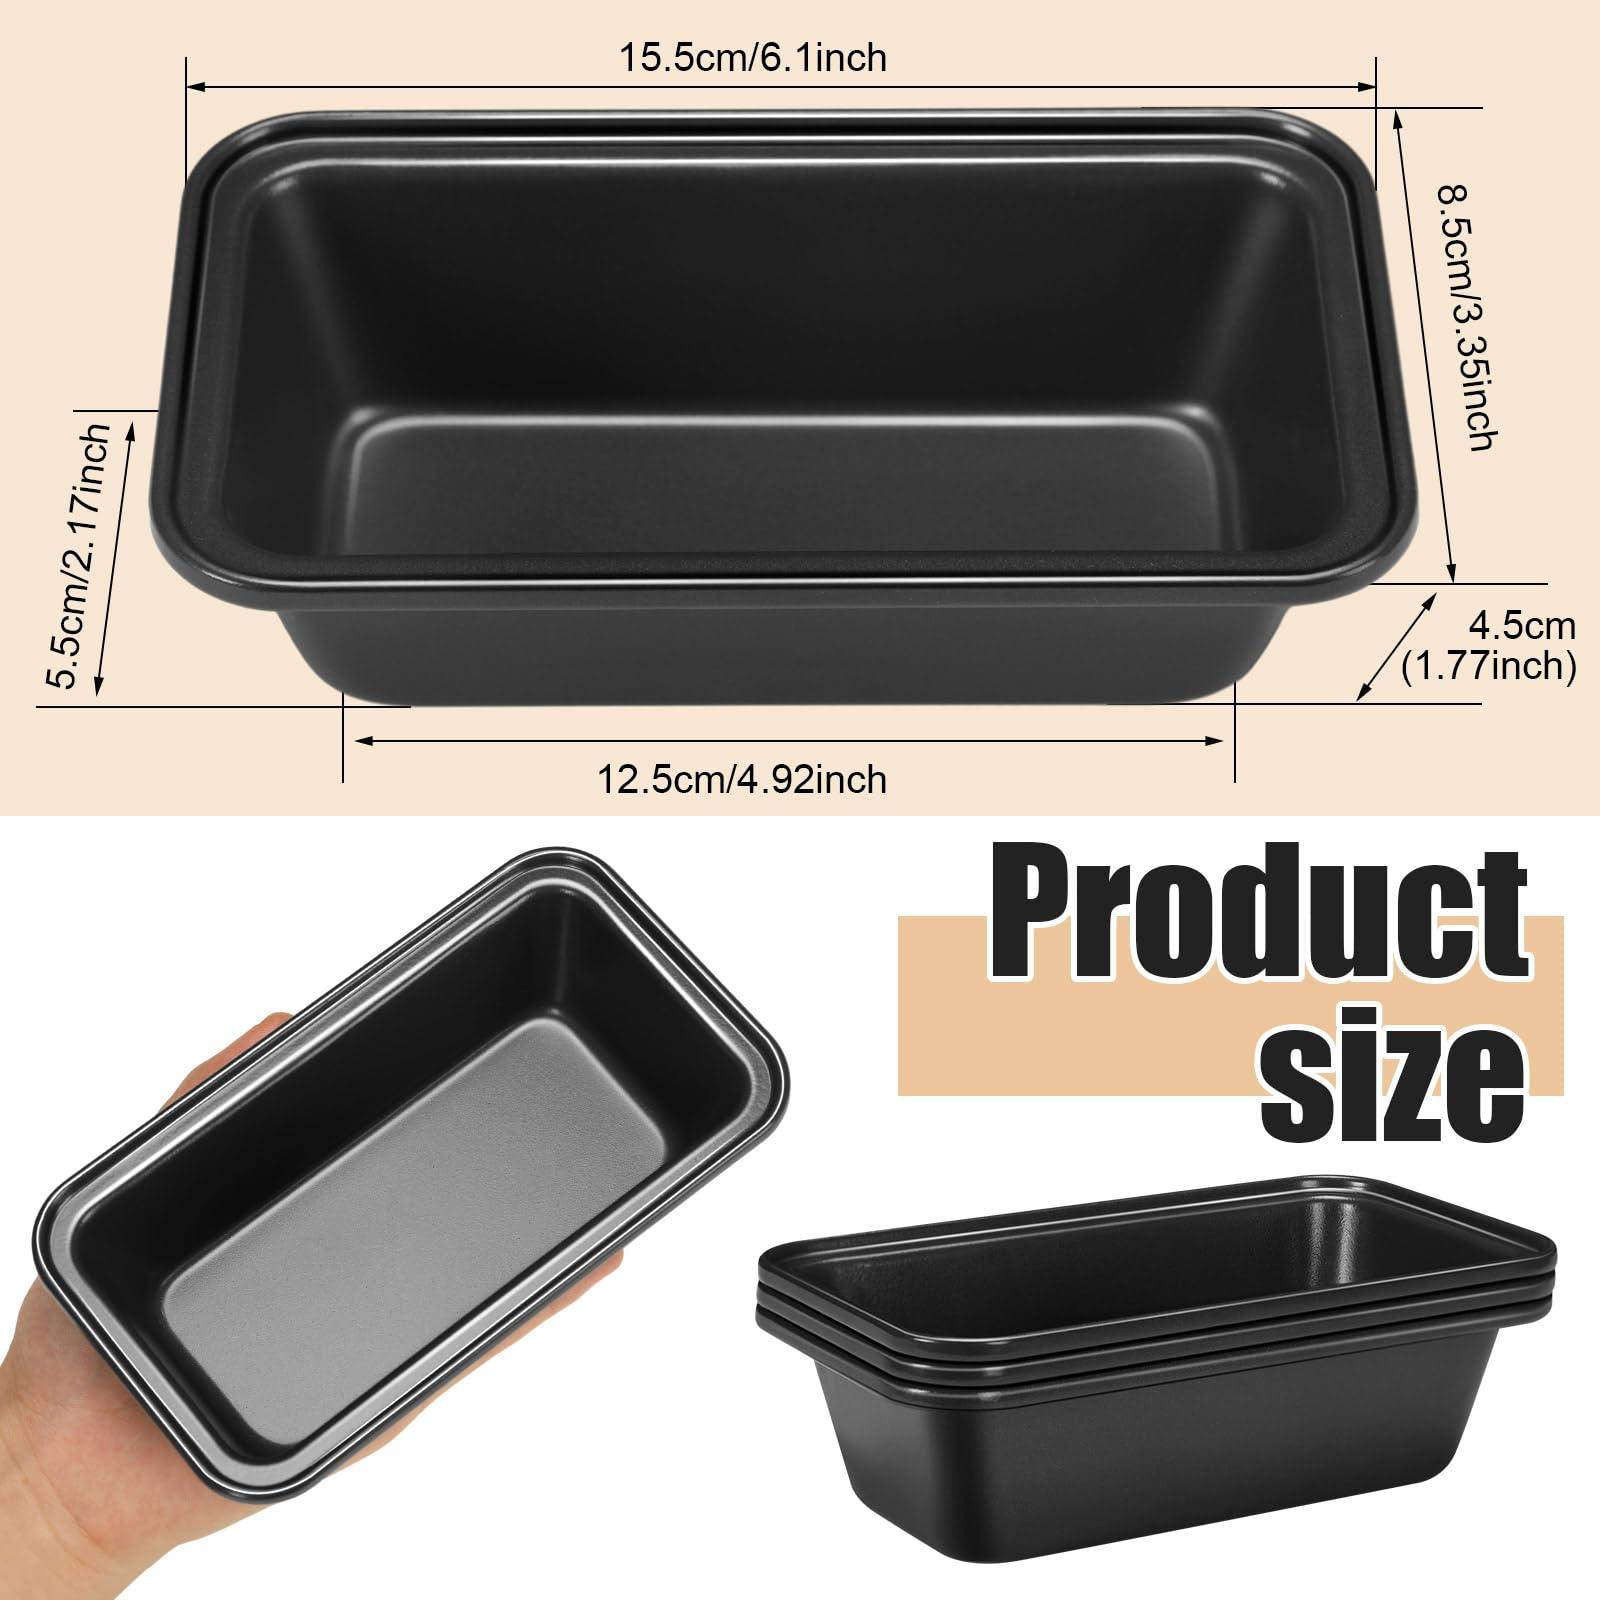 Uiifan 12 Pcs Mini Loaf Pan for Baking Bread Non Stick Small Banana Bread Tins 6.1 x 3.3 x 2.1 Inches Nonstick Carbon Steel Tiny Meatloaf Pan for Oven and Baking (Dark Grey) - CookCave